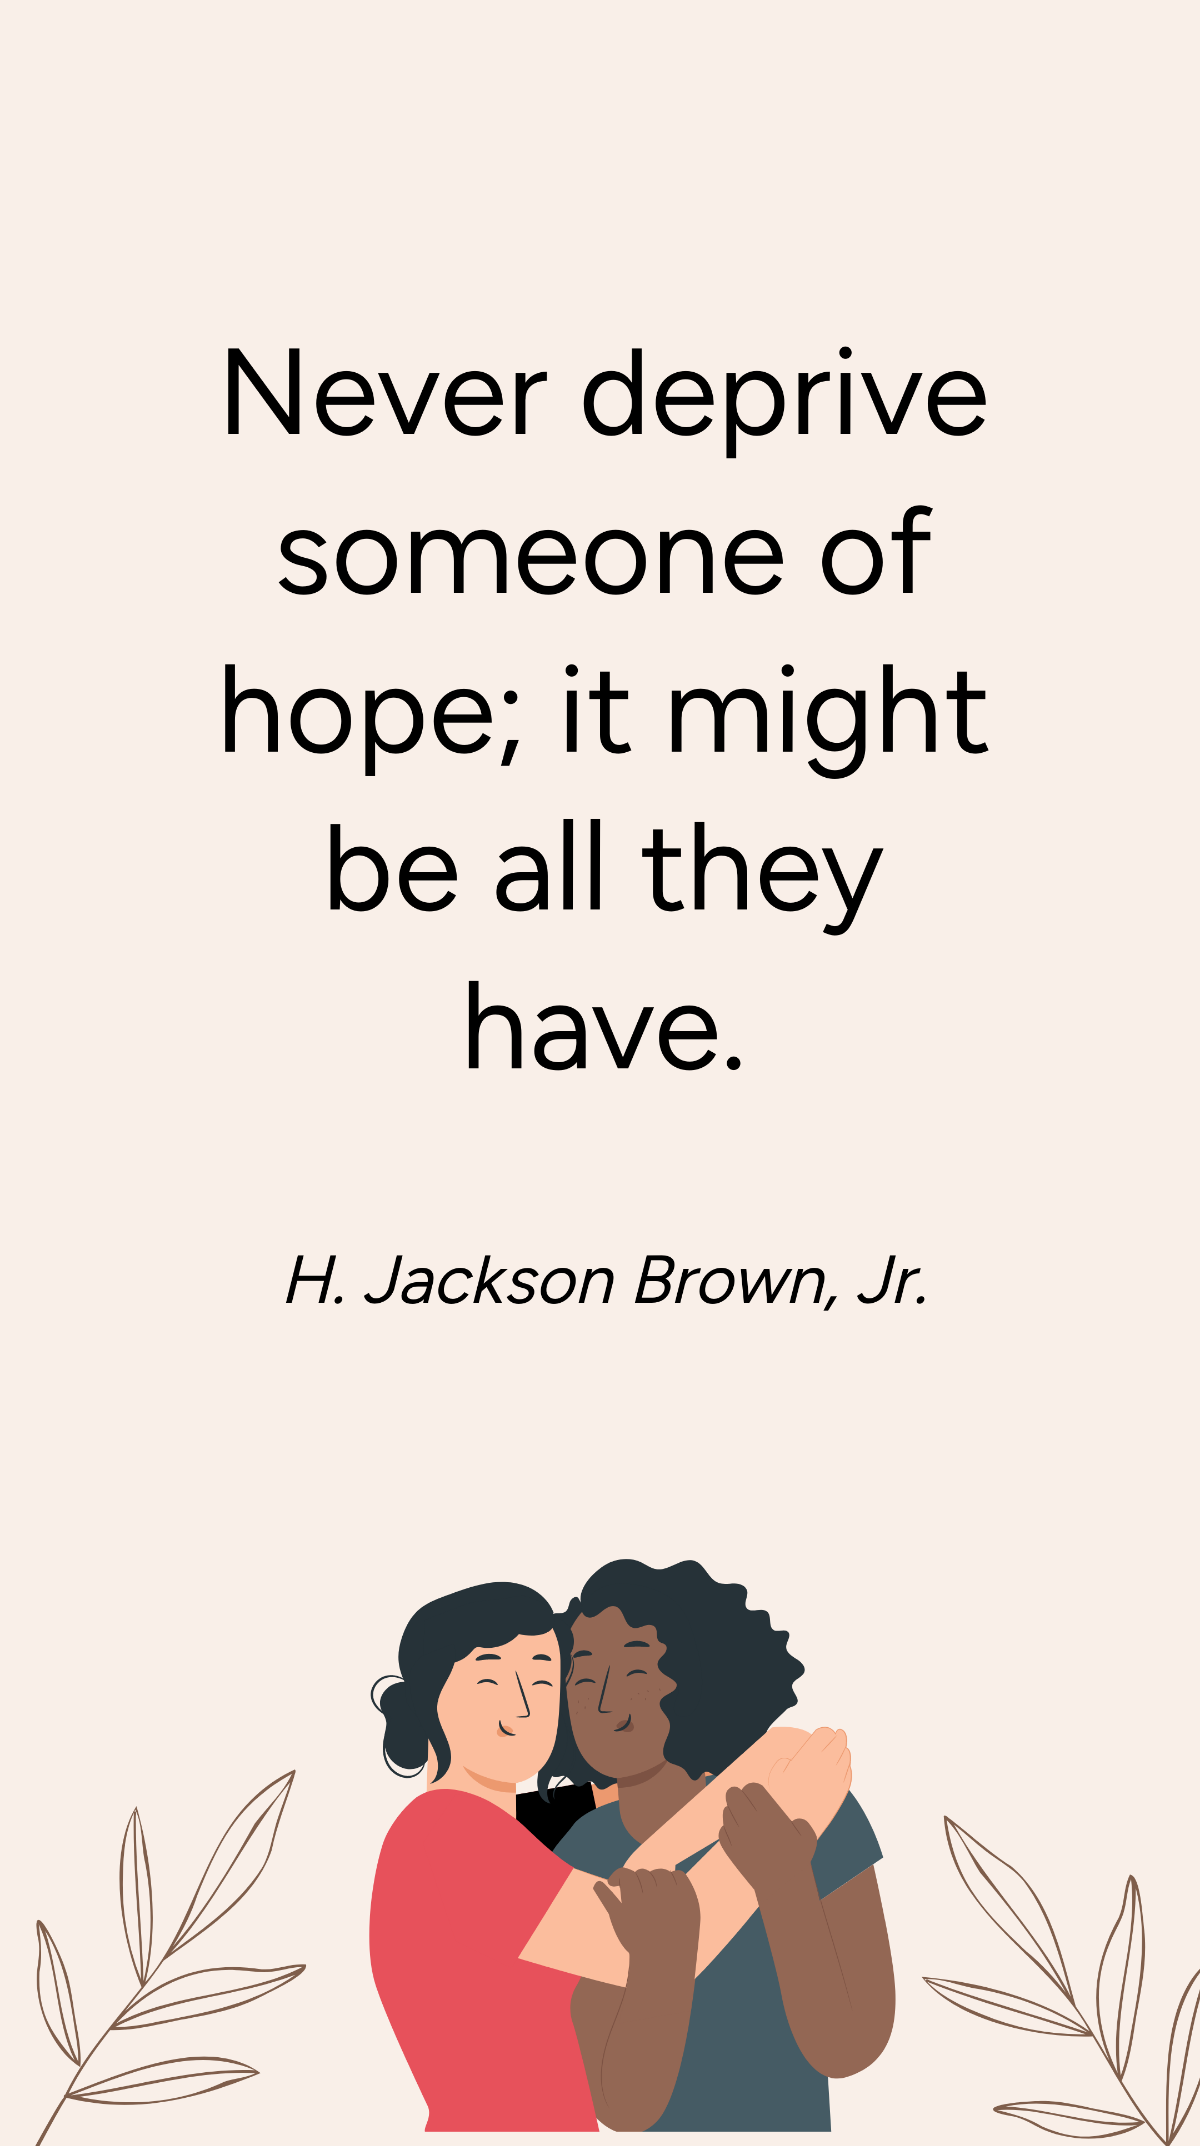 H. Jackson Brown, Jr. - Never deprive someone of hope; it might be all they have. Template